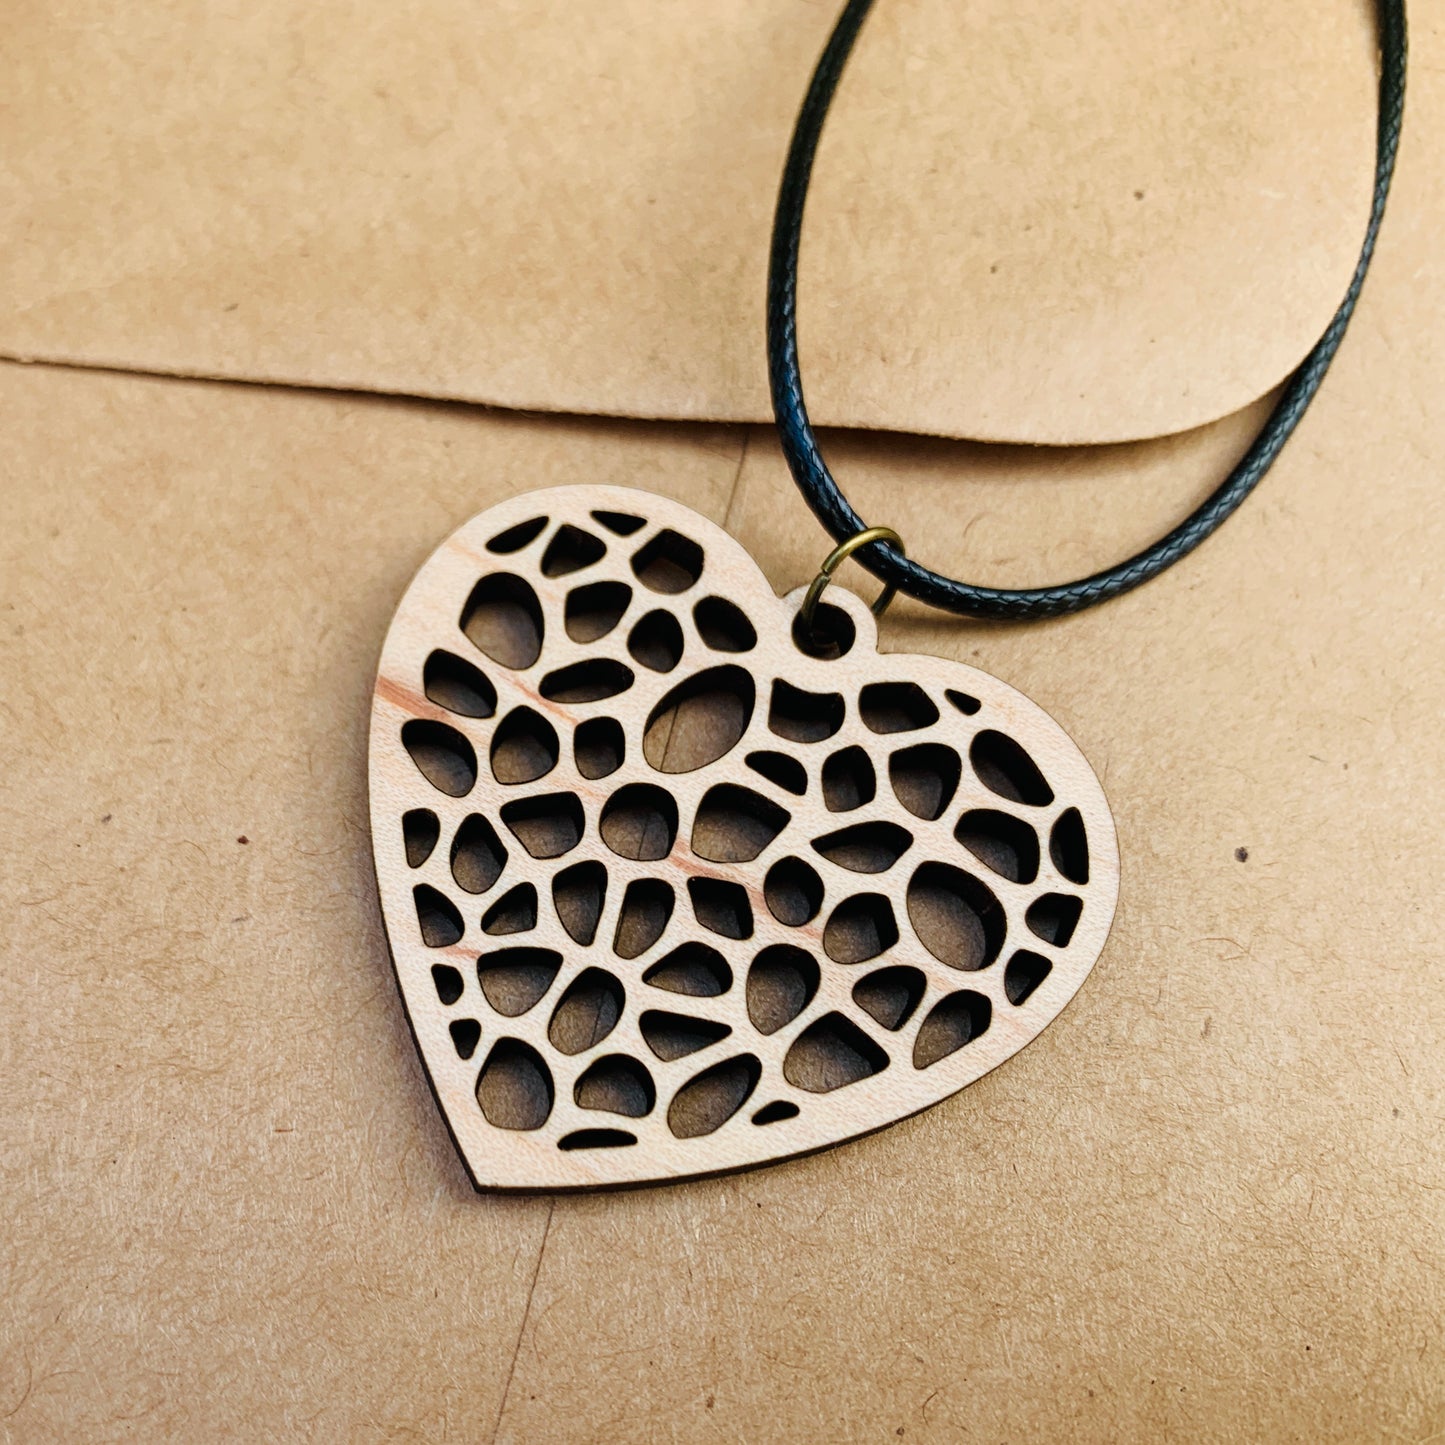 Wood Heart Jewelry: Earrings or Necklace - Perfect for Valentine's & Anniversaries